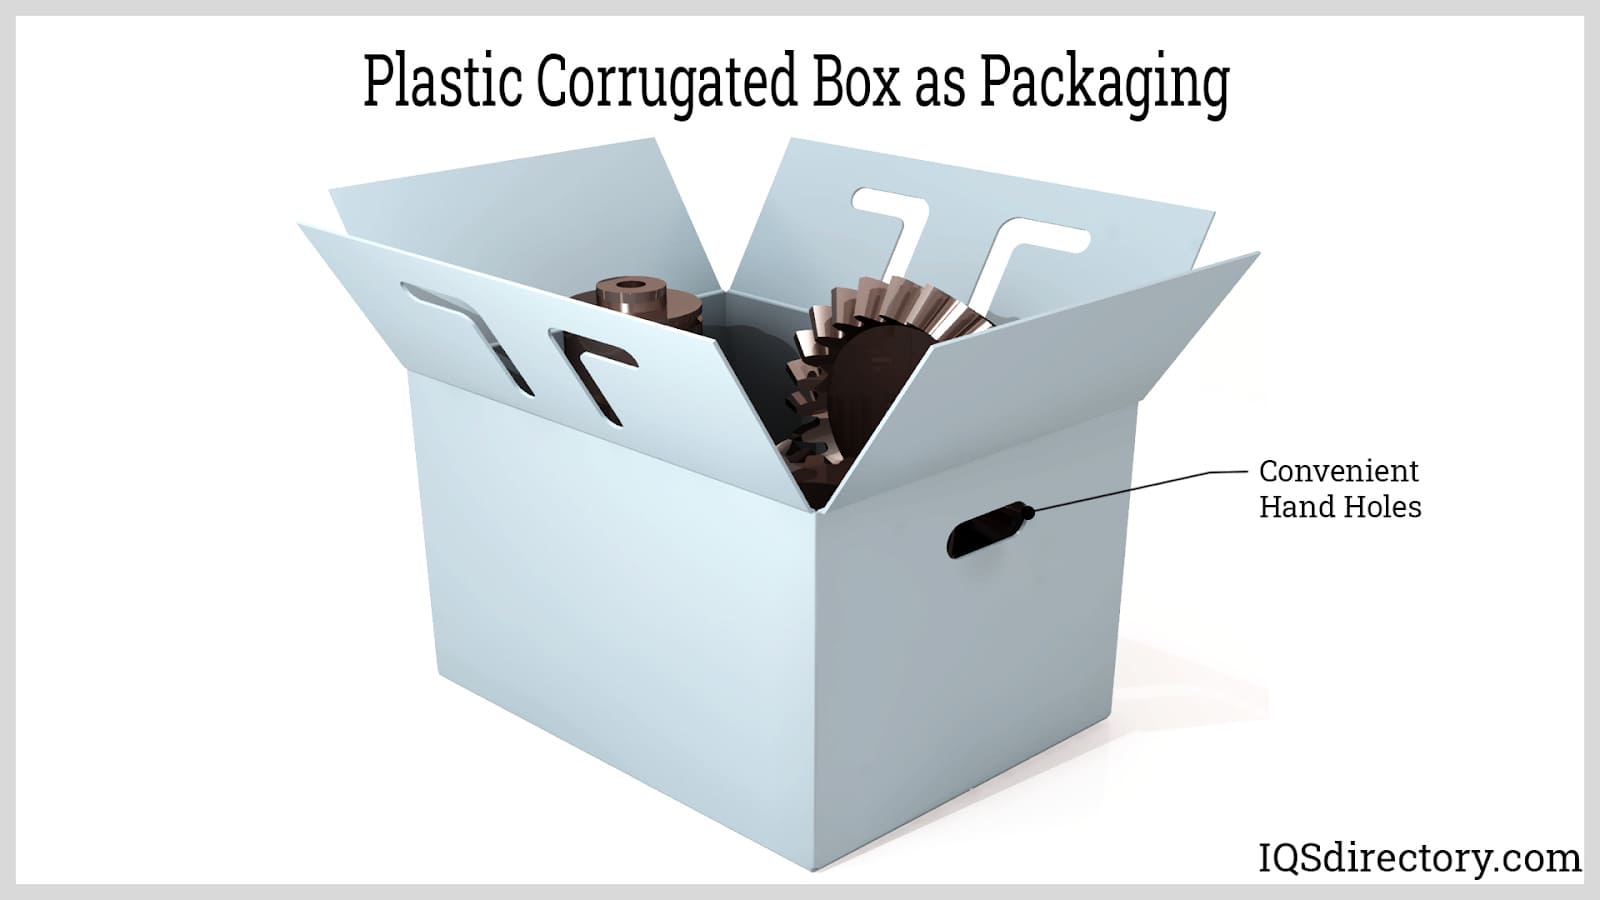 Plastic Corrugated Box as Packaging